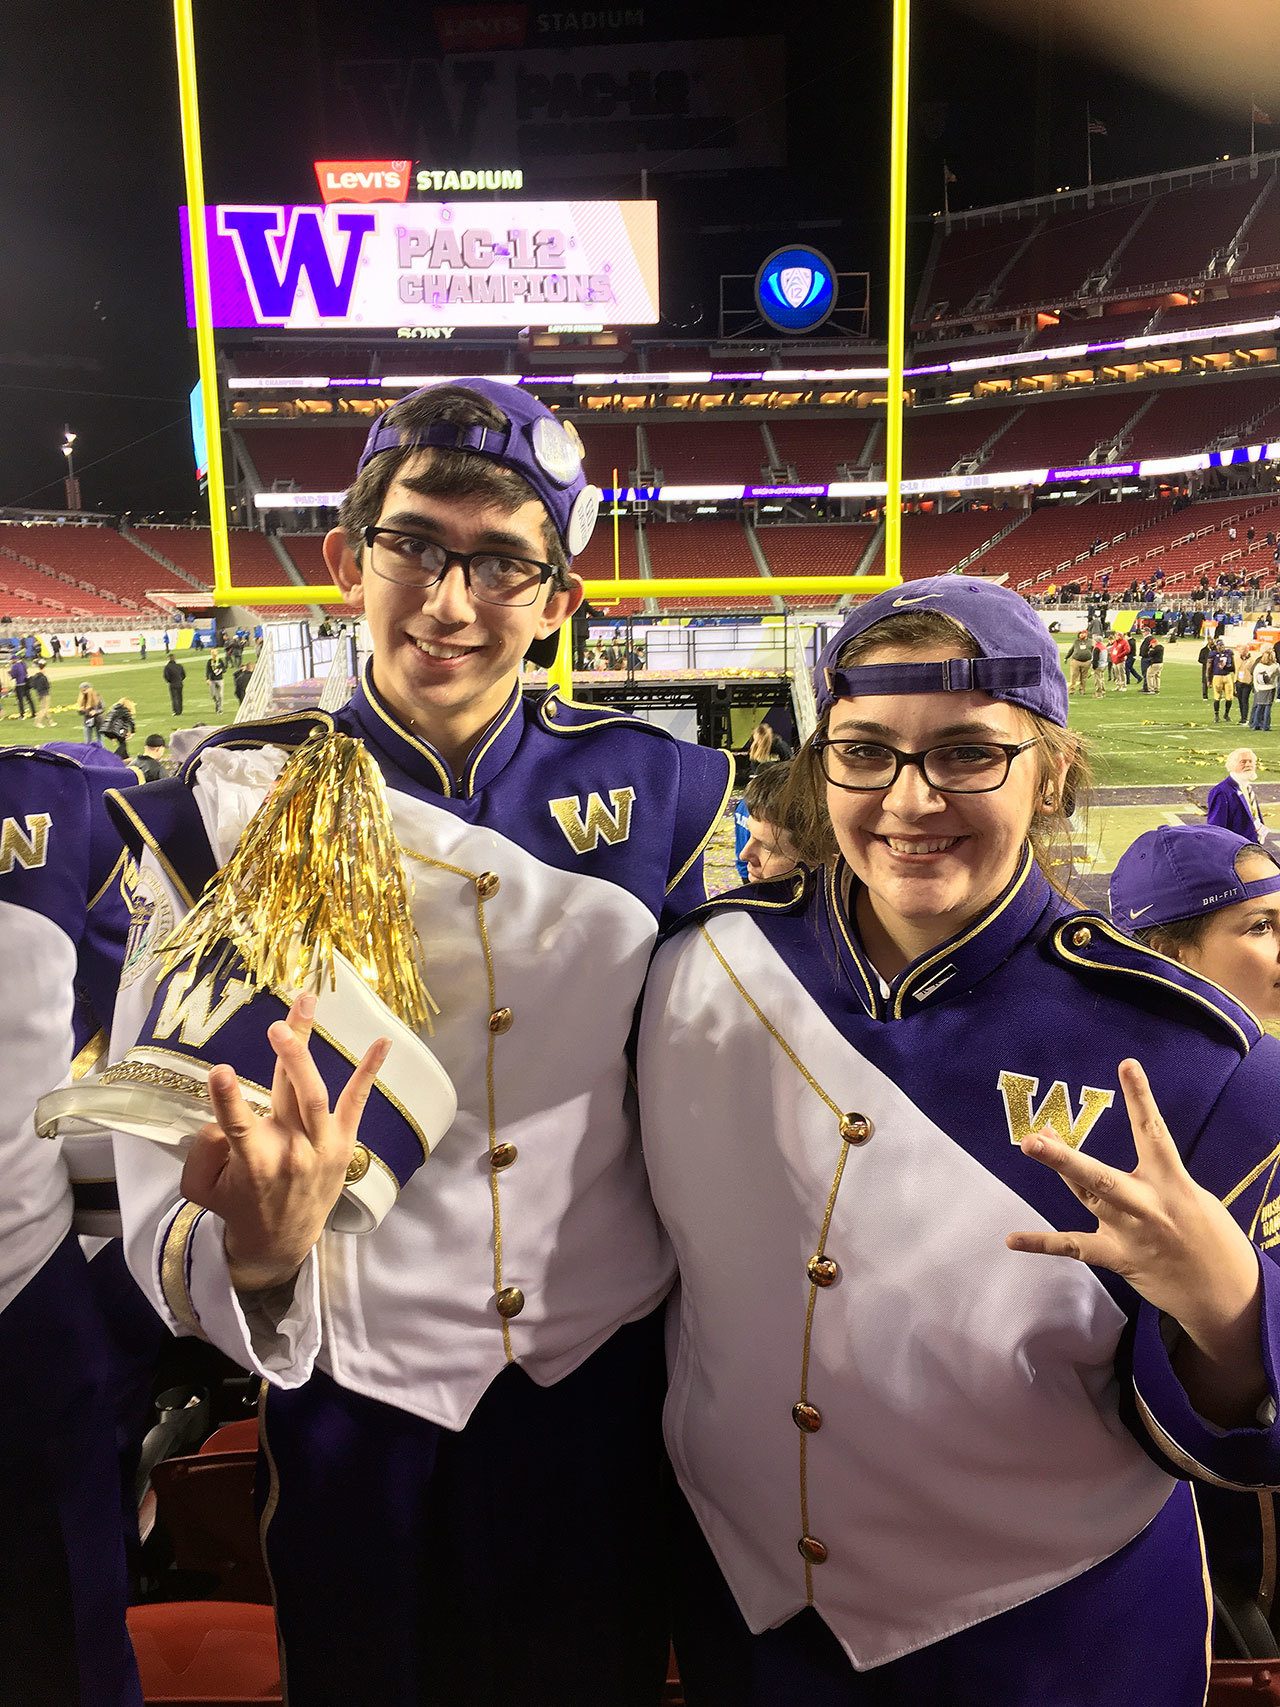 Wolfplaying for the Dawgs: SHS grad Sarah Doty, UW Husky Band gear up for Peach Bowl